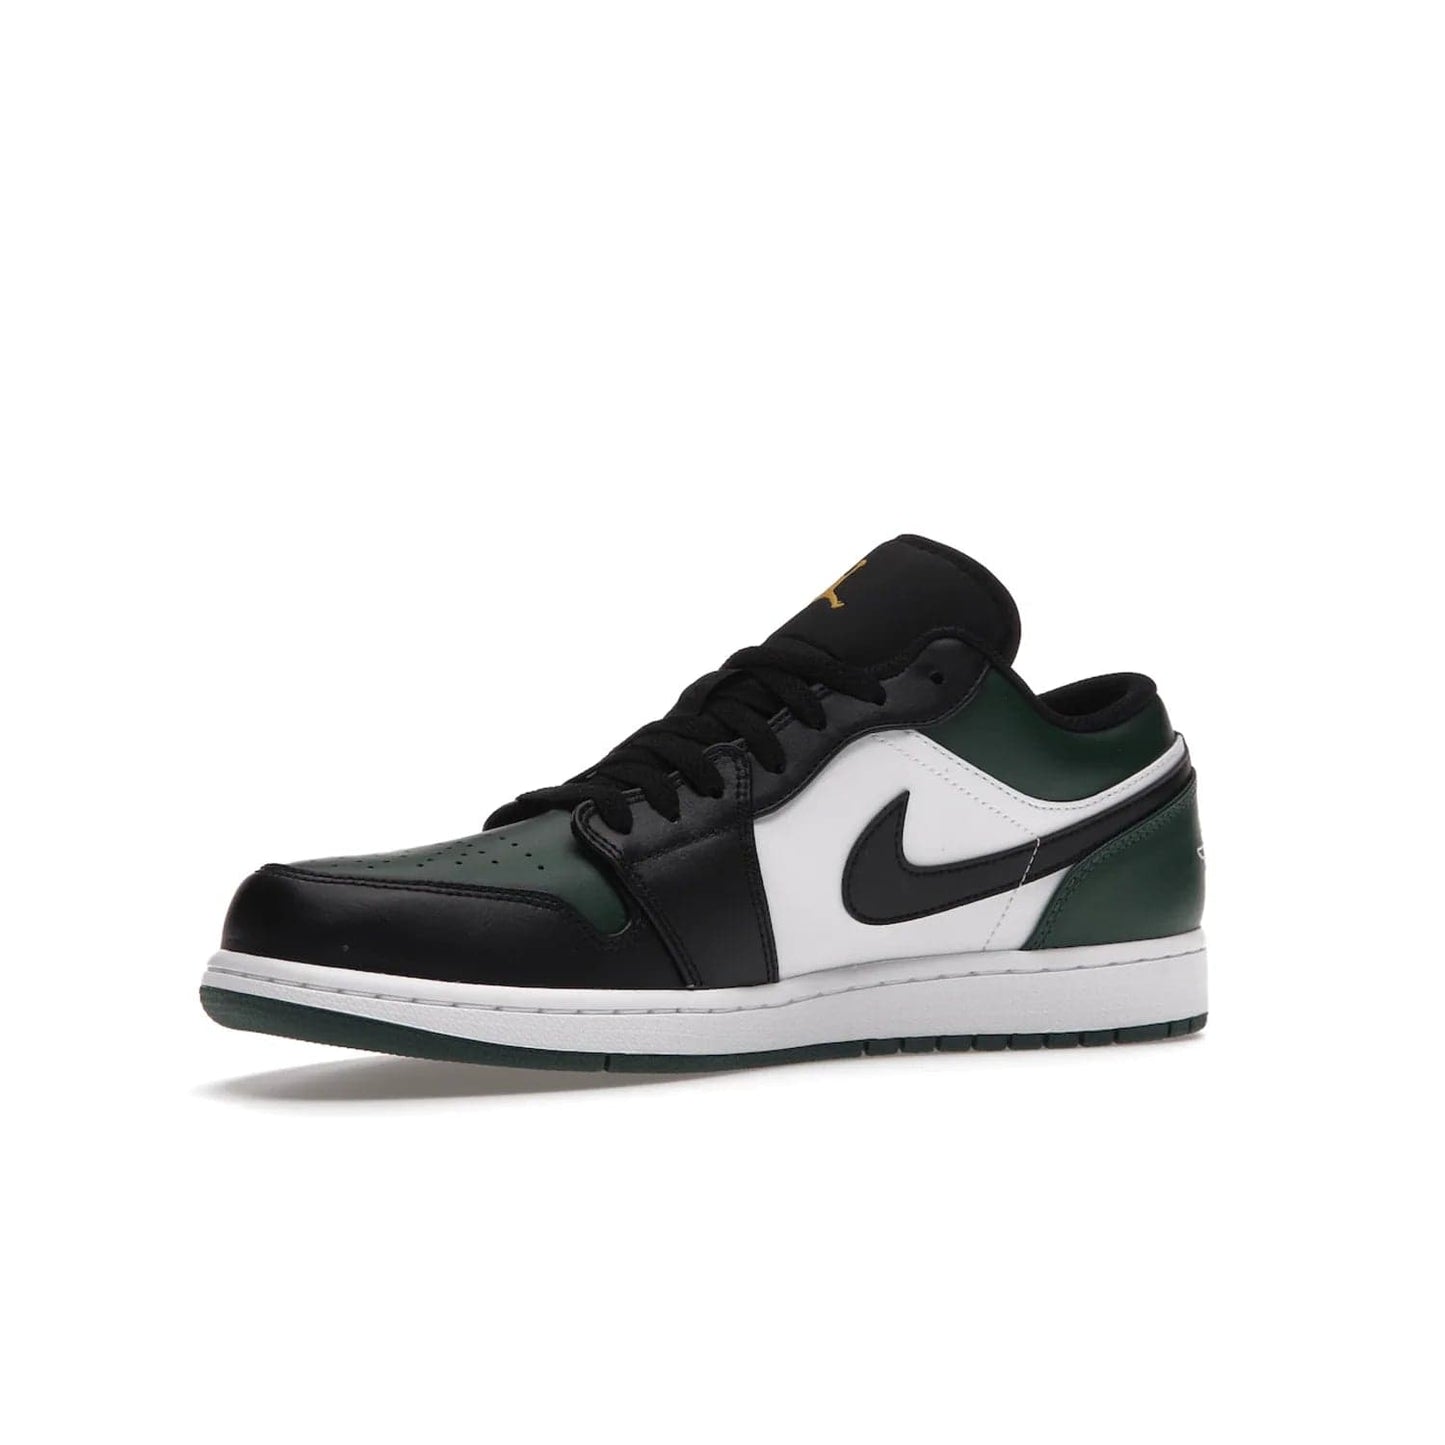 Jordan 1 Low Green Toe - Image 16 - Only at www.BallersClubKickz.com - The Jordan 1 Low Green Toe features white, black and Noble Green leather with black Swoosh. Get the classic Bred Toe-inspired color blocking with green perforated toe box. White and green Air sole completes the design. Released in October 2021 at only $100. Grab your pair now!